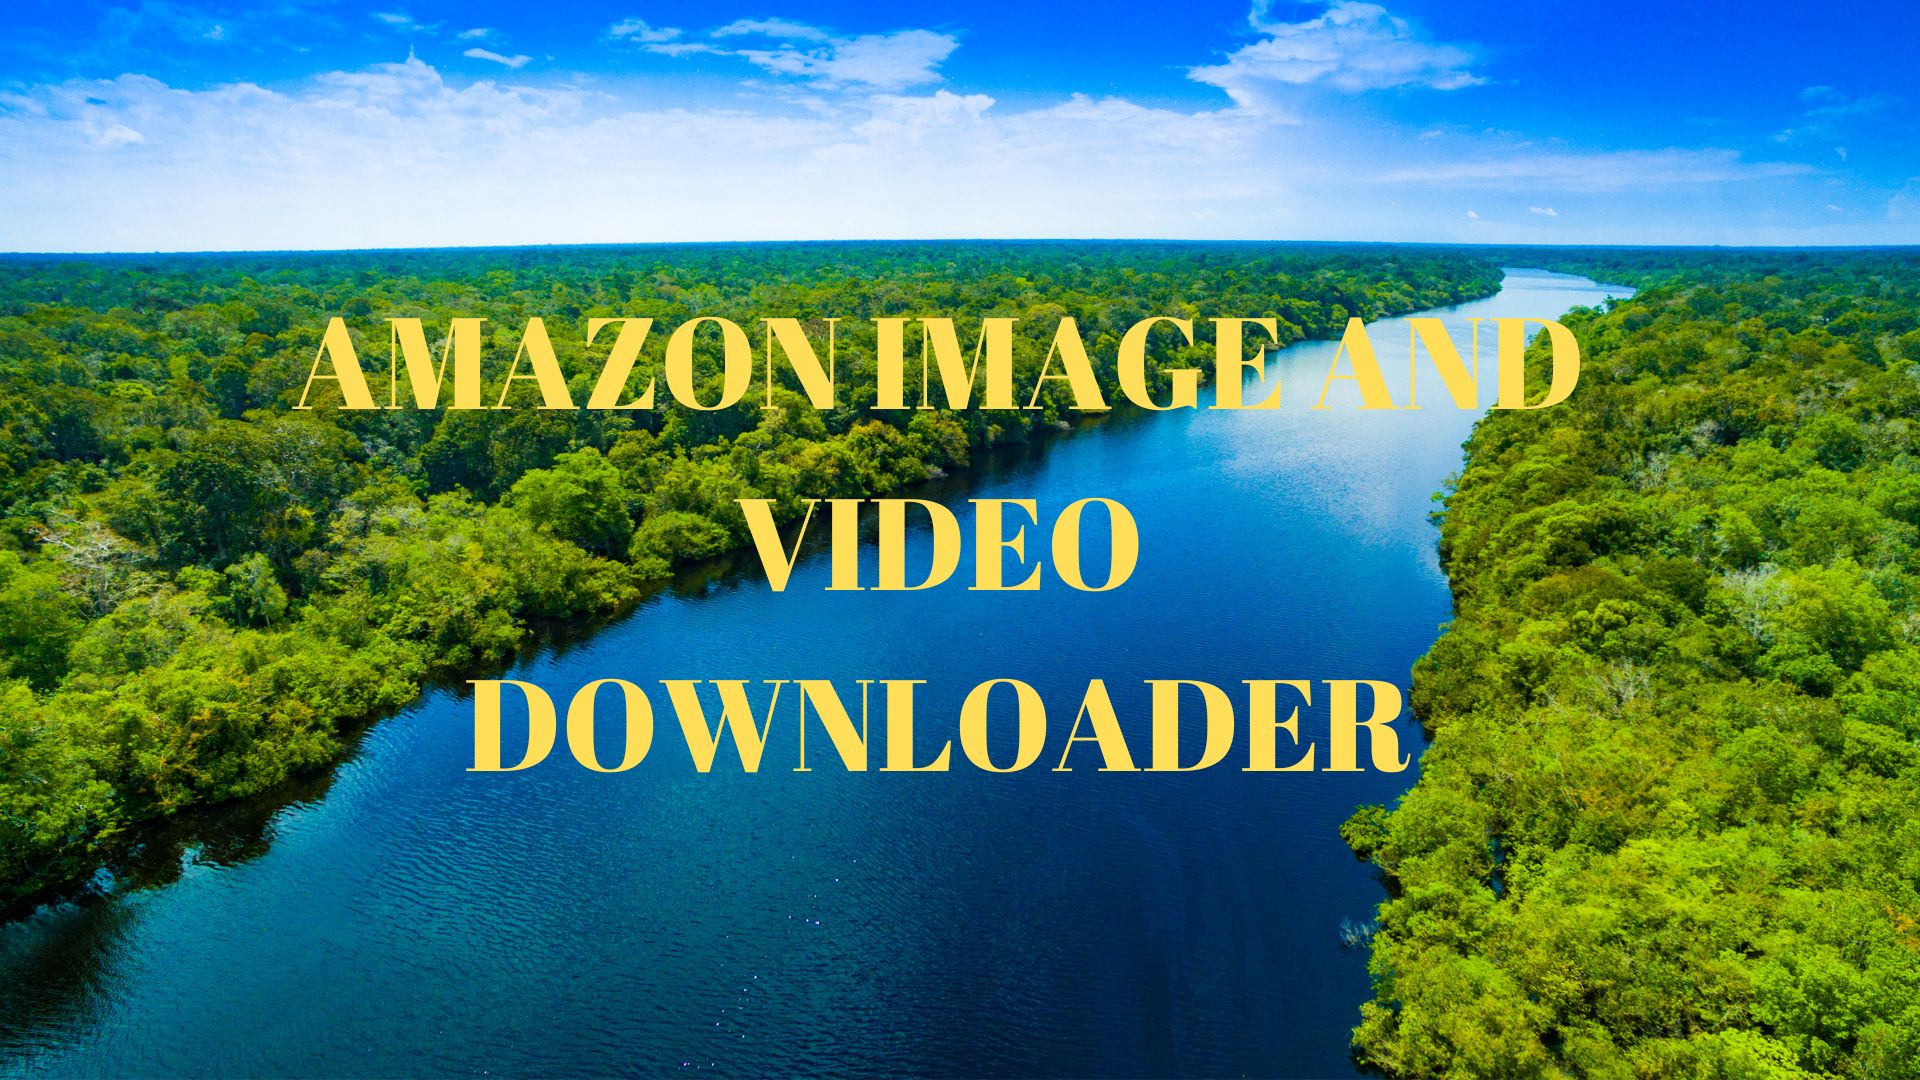 Streamline Your Downloads: Amazon Image and Video Downloader